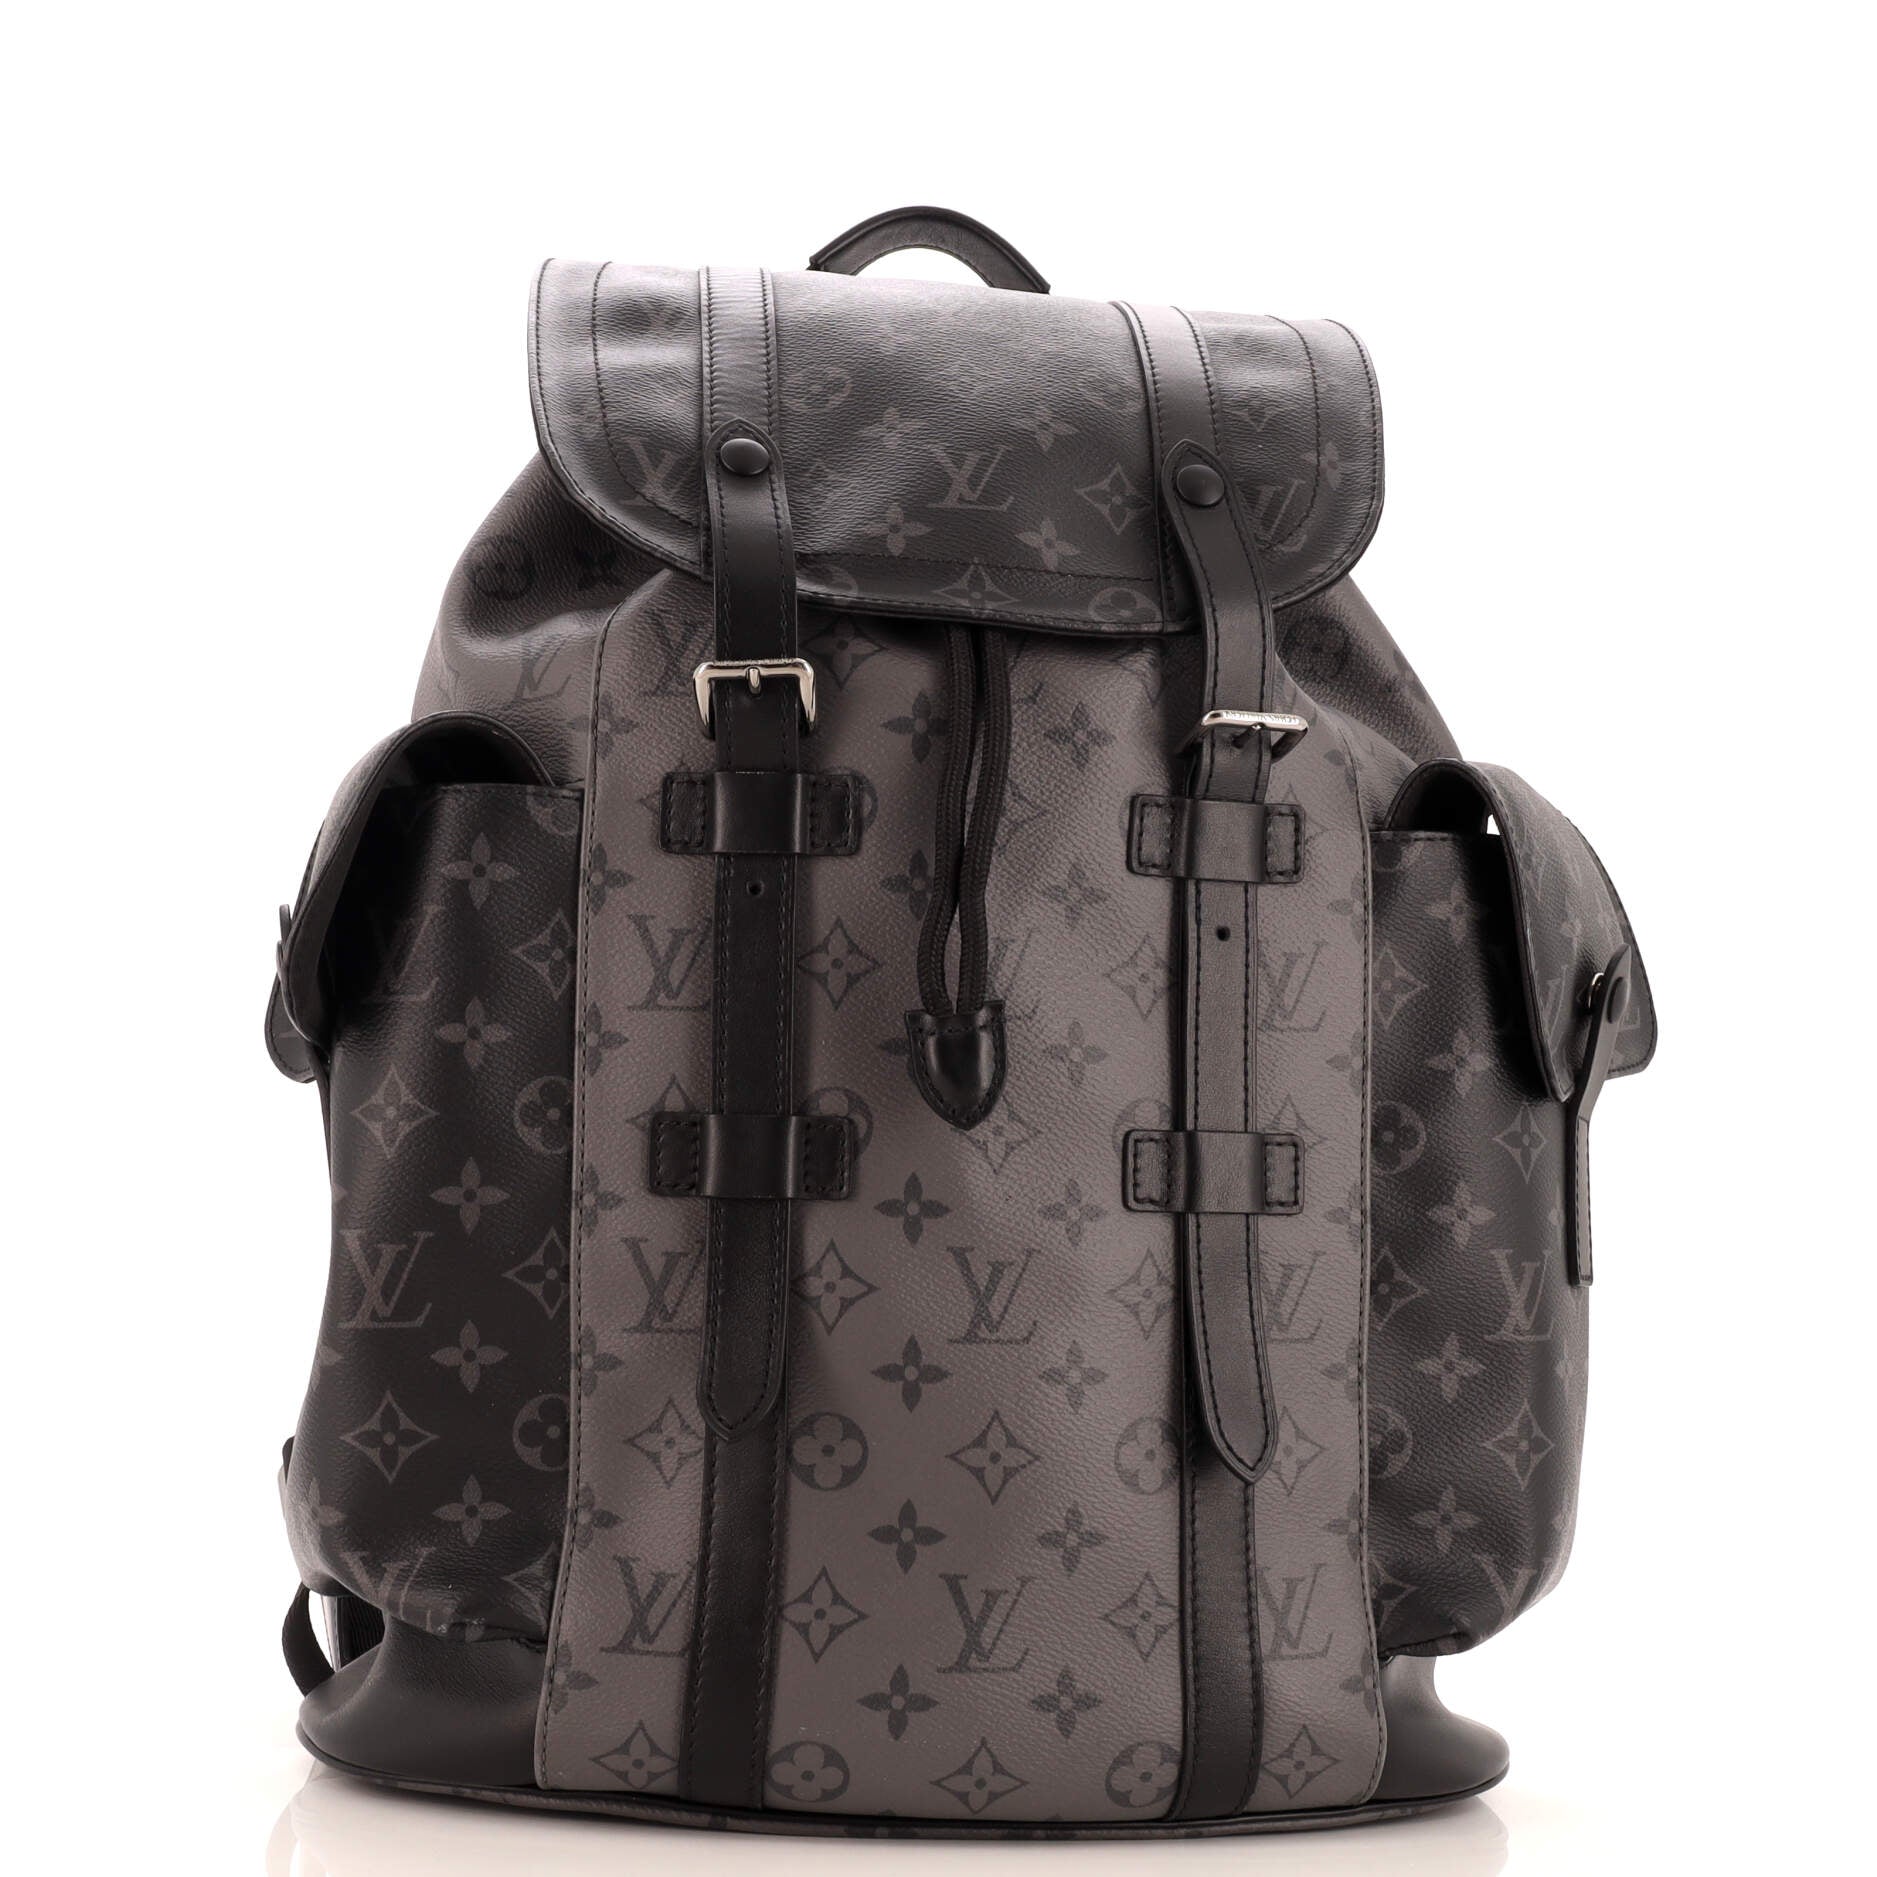 Christopher Backpack Reverse Monogram Eclipse Canvas PM